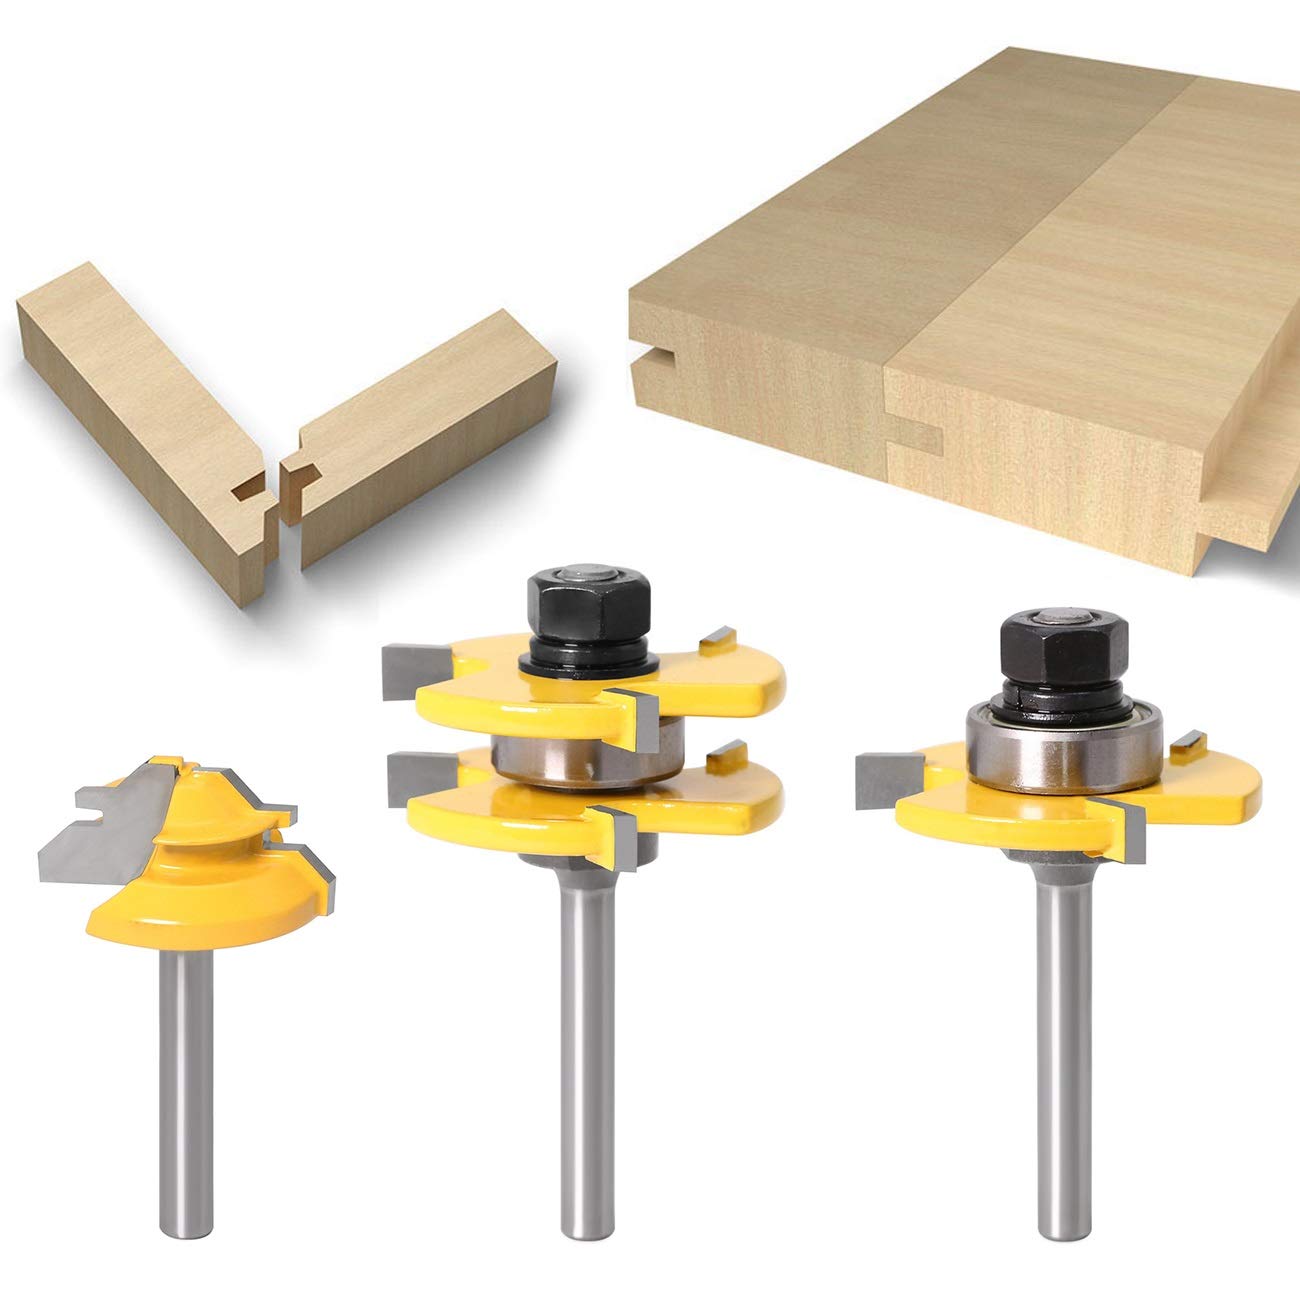 WICHEMI 1/4 Shank Tongue and Groove Router Bits+ 1/4 Shank 45° Lock Miter Router Bit, Wood Milling Cutter Woodworking Grooving Tool Kit for Router Table/Base Router/Kitchen/Bathroom